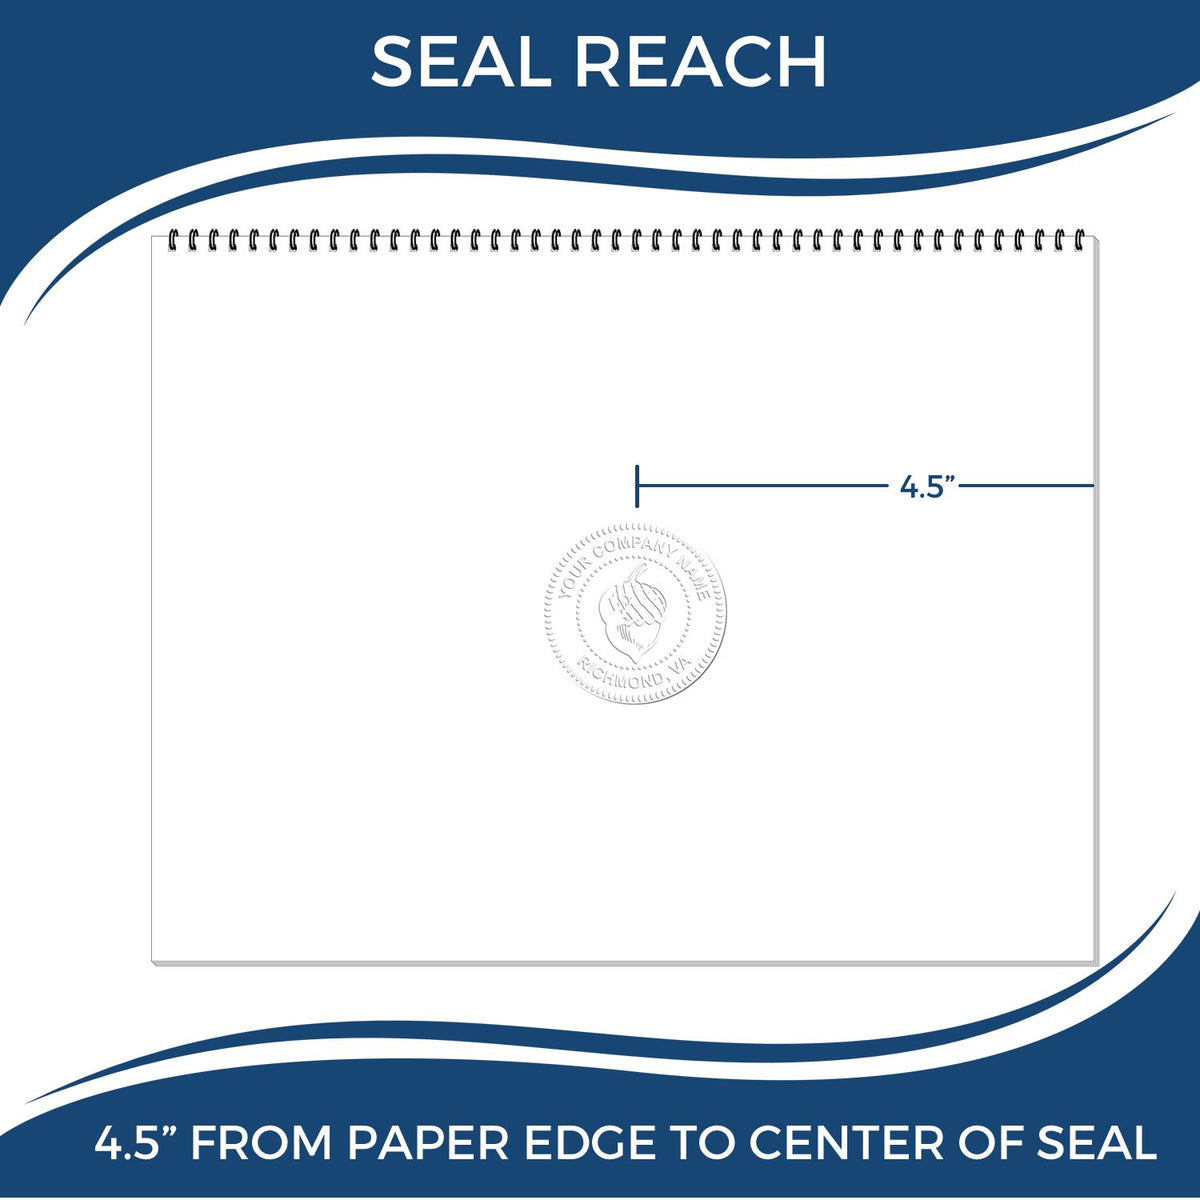 An infographic showing the seal reach which is represented by a ruler and a miniature seal image of the Extended Long Reach Indiana Architect Seal Embosser